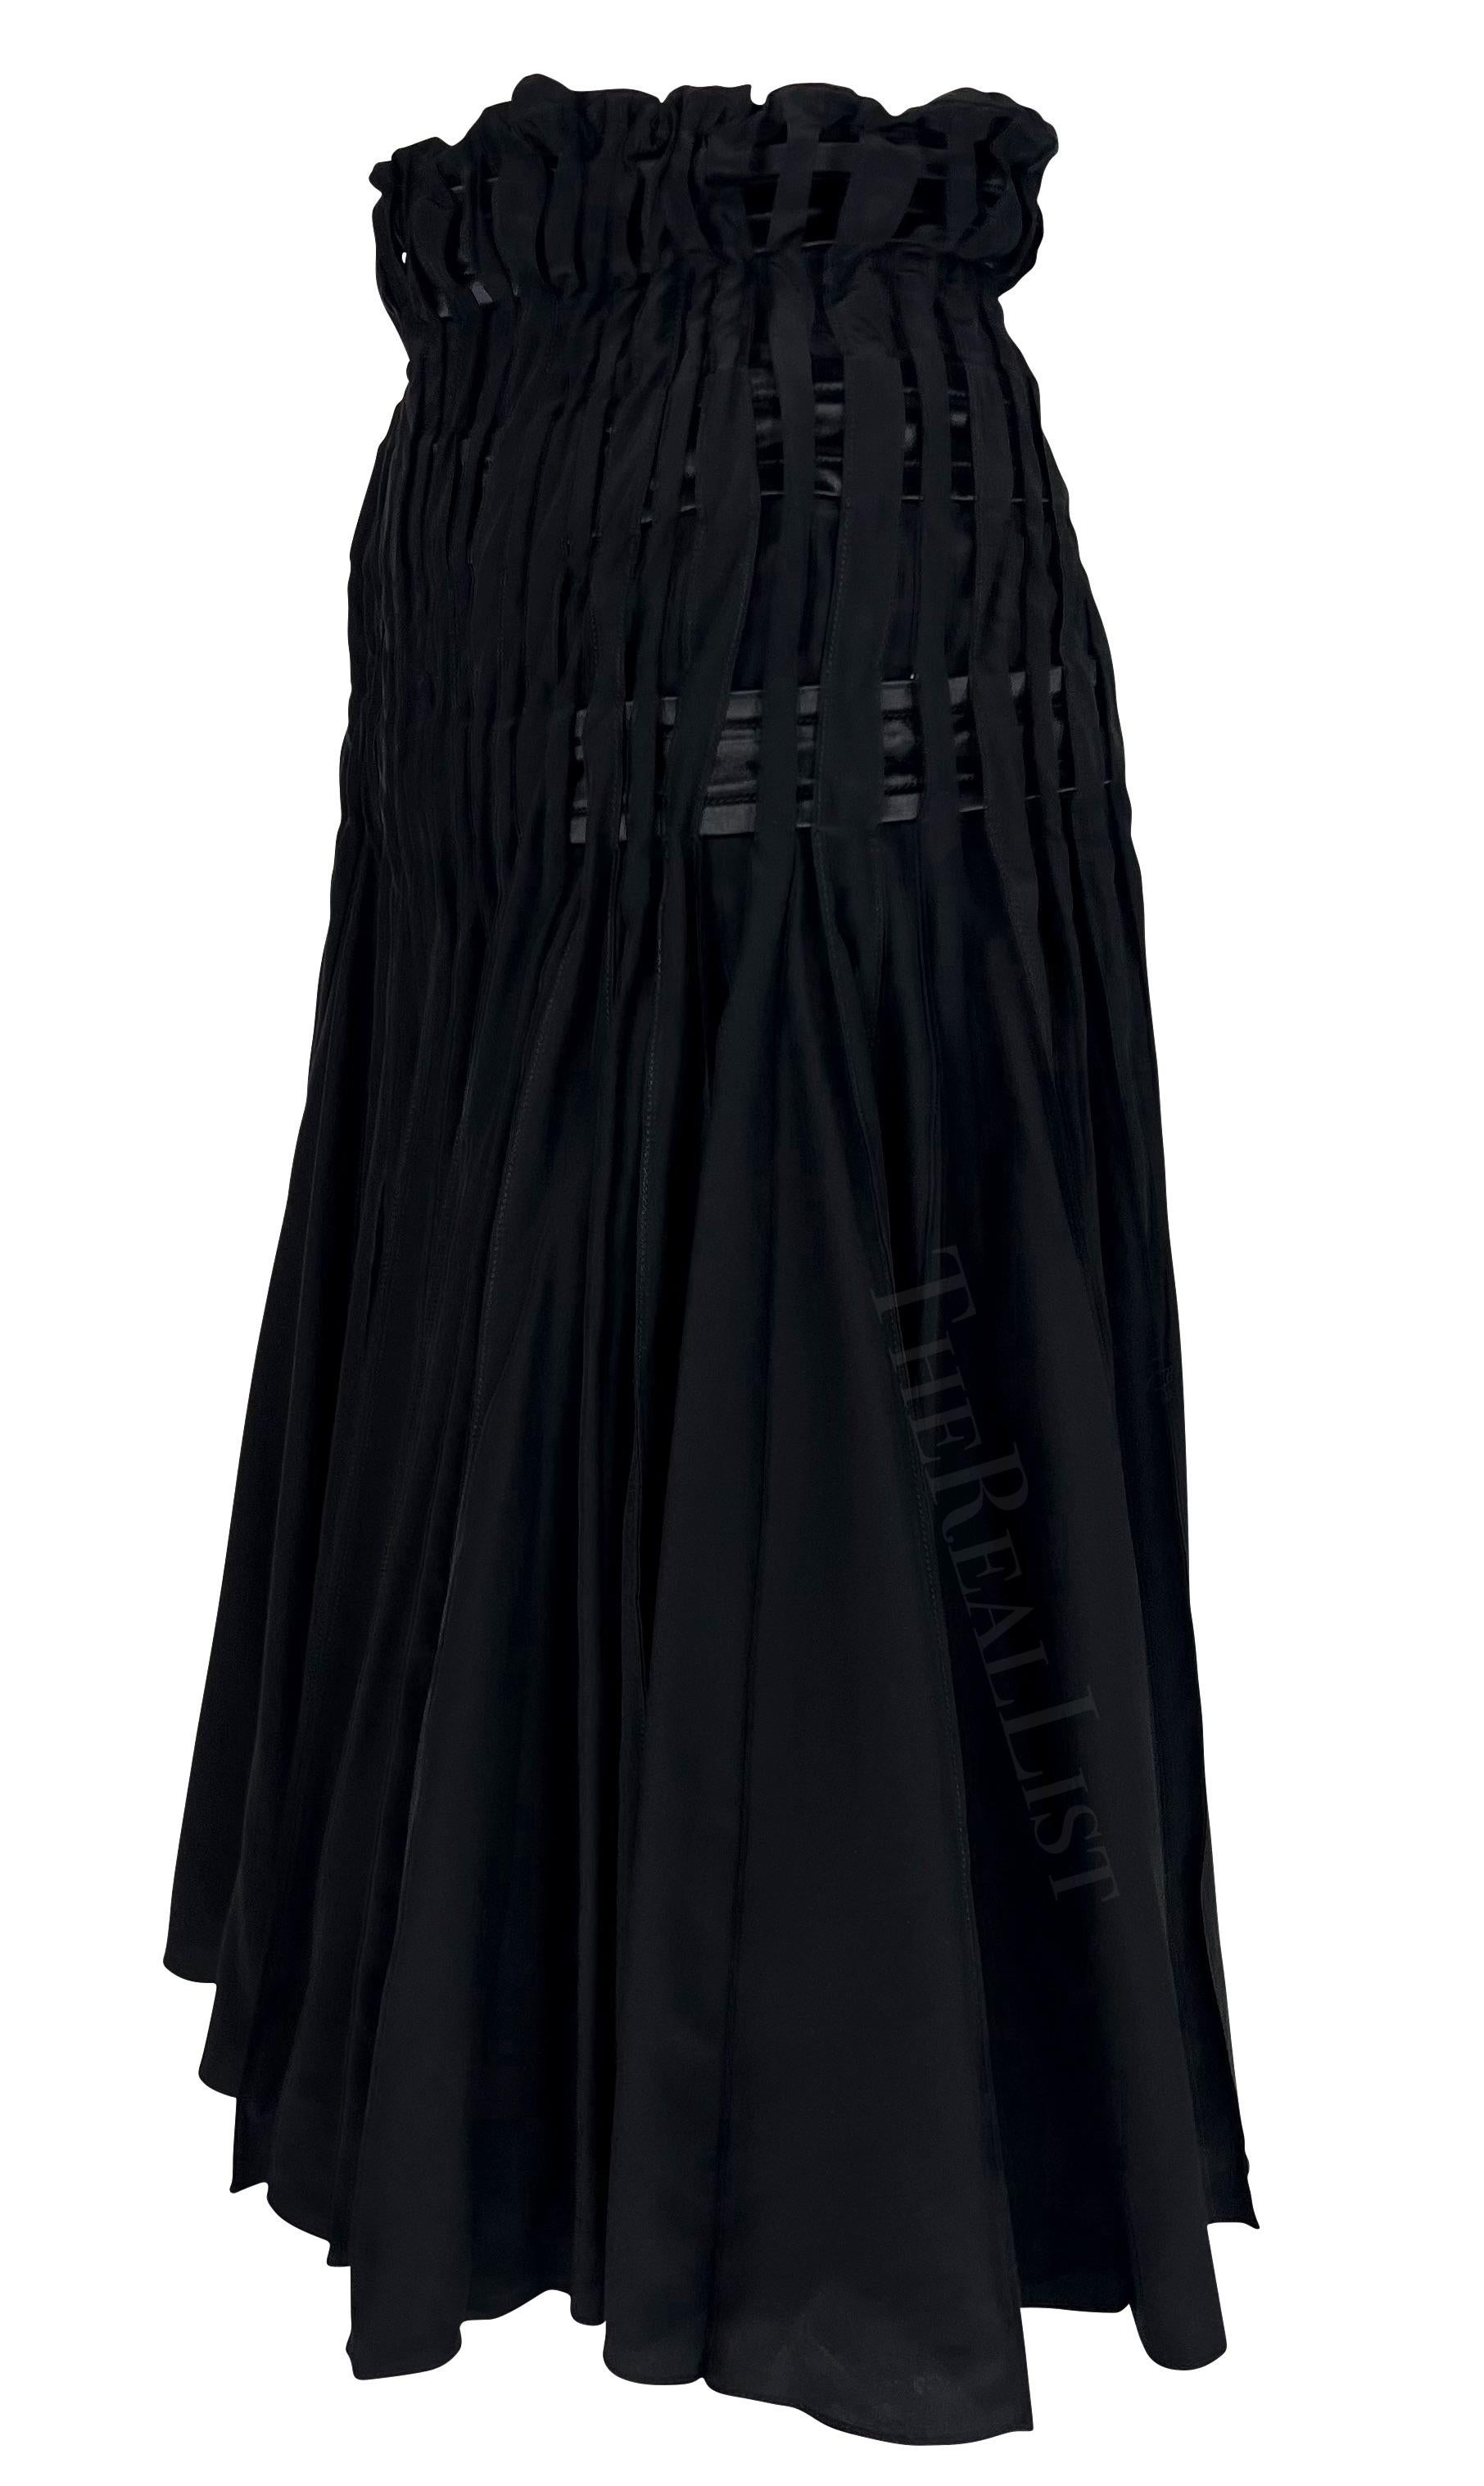 Presenting a black pleated Yves Saint Laurent Rive Gauche skirt, designed by Tom Ford. From the Fall/Winter 2001 collection, this fabulous flare skirt features a high waist and satin ribbons woven between pleats. An incredible early piece of Ford's